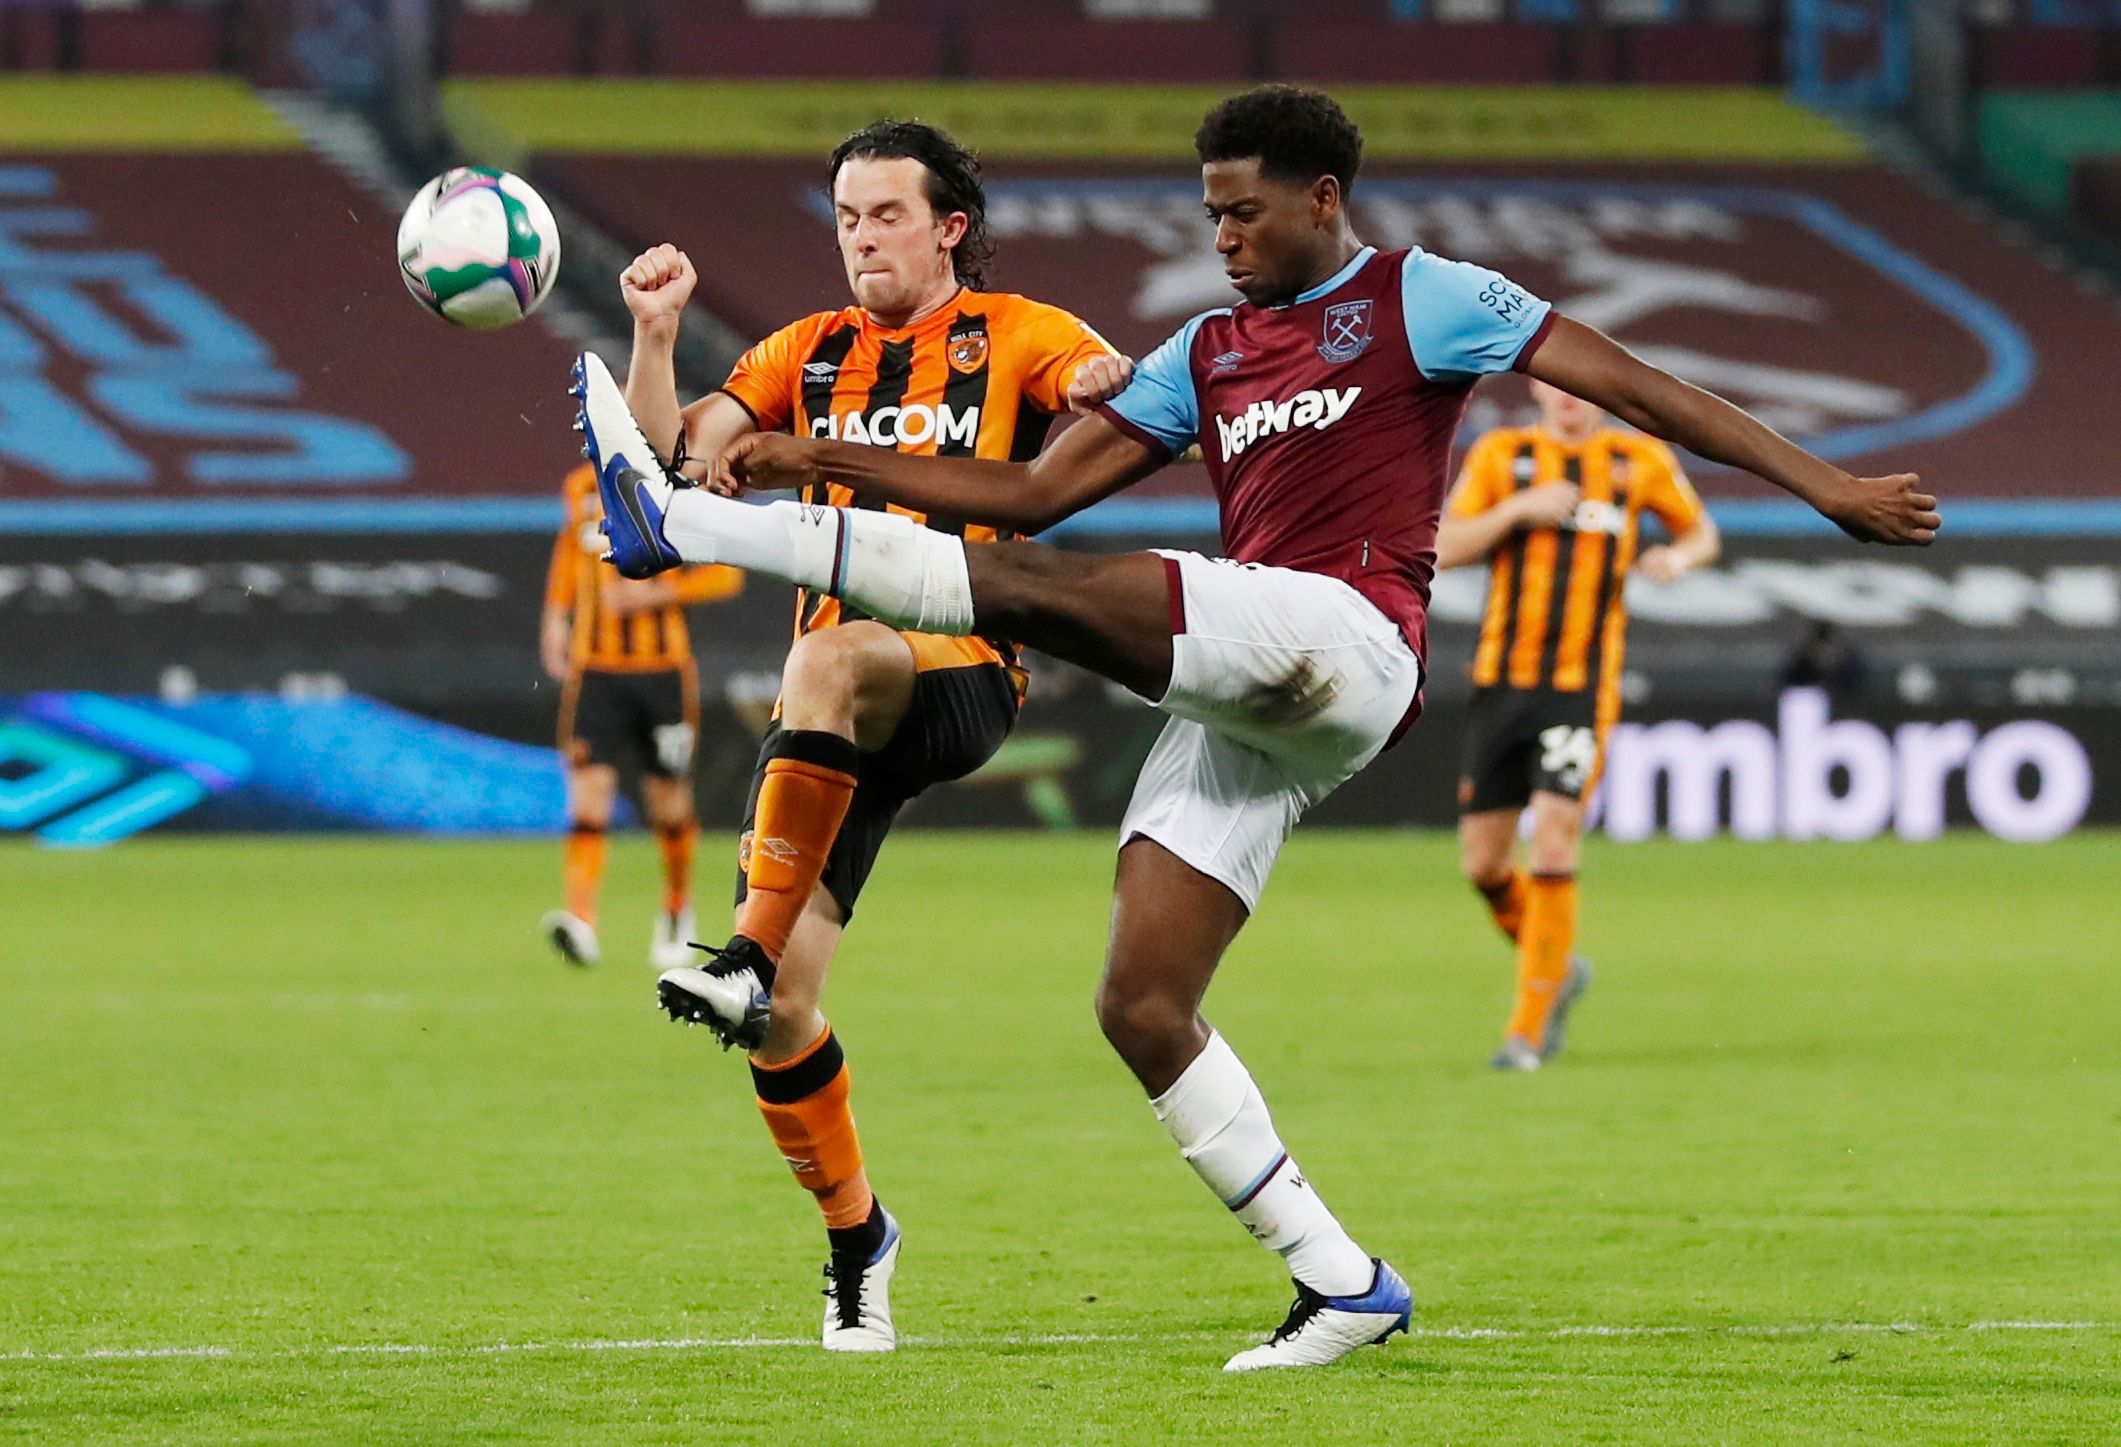 Soccer Football - Carabao Cup Third Round - West Ham United v Hull City - London Stadium, London, Britain - September 22, 2020.  West Ham United's Aji Alese in action with  Hull City's George Honeyman. Pool via REUTERS/Alastair Grant EDITORIAL USE ONLY. No use with unauthorized audio, video, data, fixture lists, club/league logos or 'live' services. Online in-match use limited to 75 images, no video emulation. No use in betting, games or single club/league/player publications.  Please contact yo